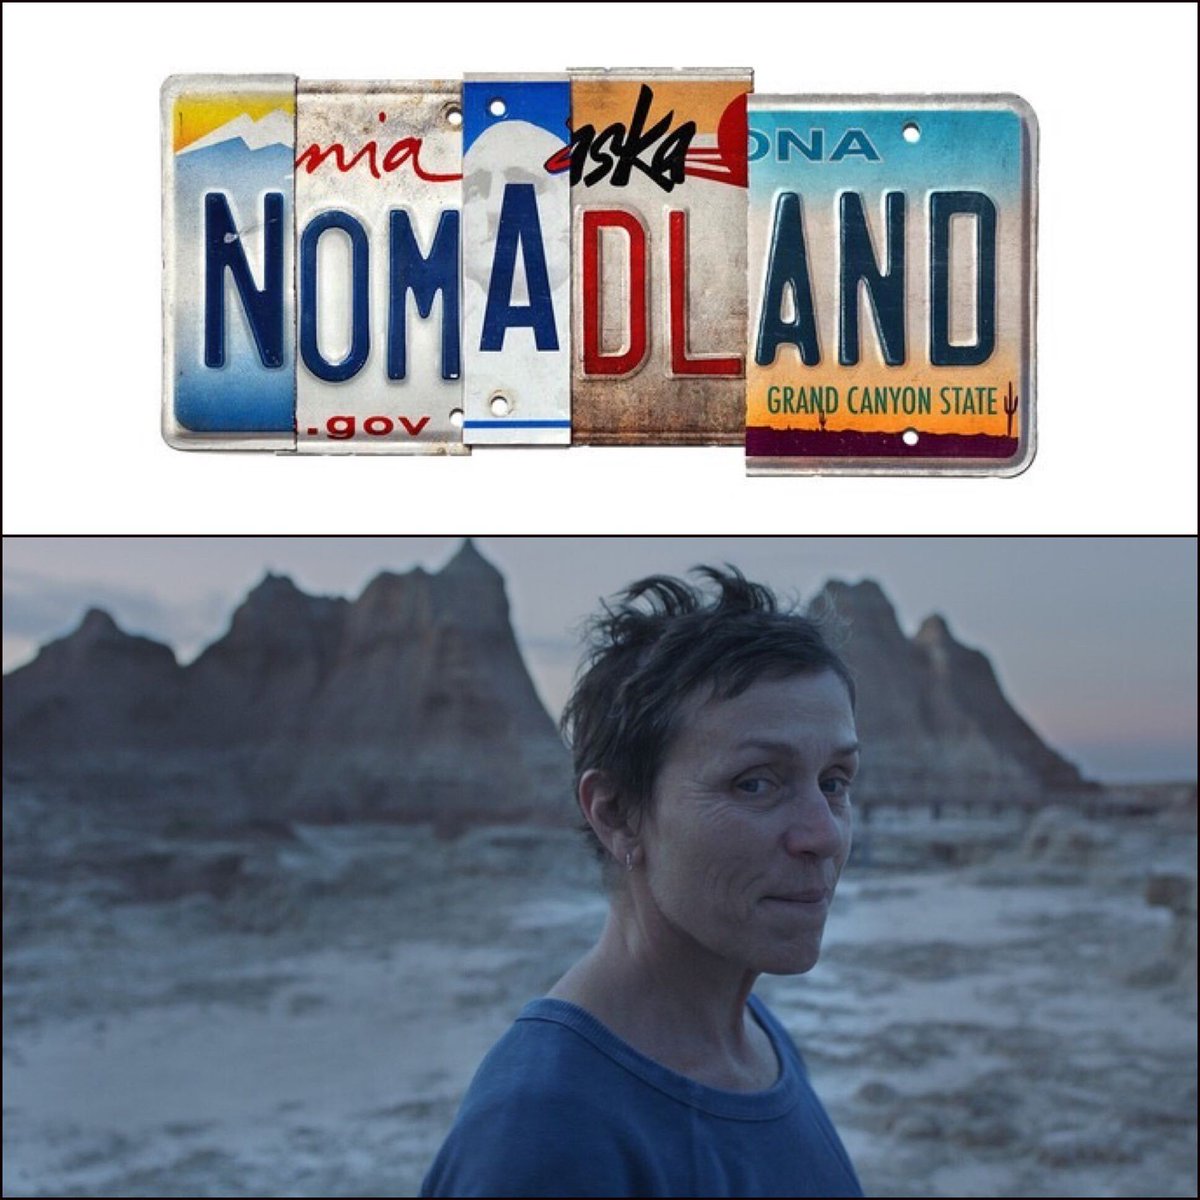 Rotten Tomatoes On Twitter Congrats To Writer And Director Chloe Zhao For Winning The Golden Lion At This Year S Venicefilmfestival For Her Film Nomadland 100 Https T Co Tajefgbm8h